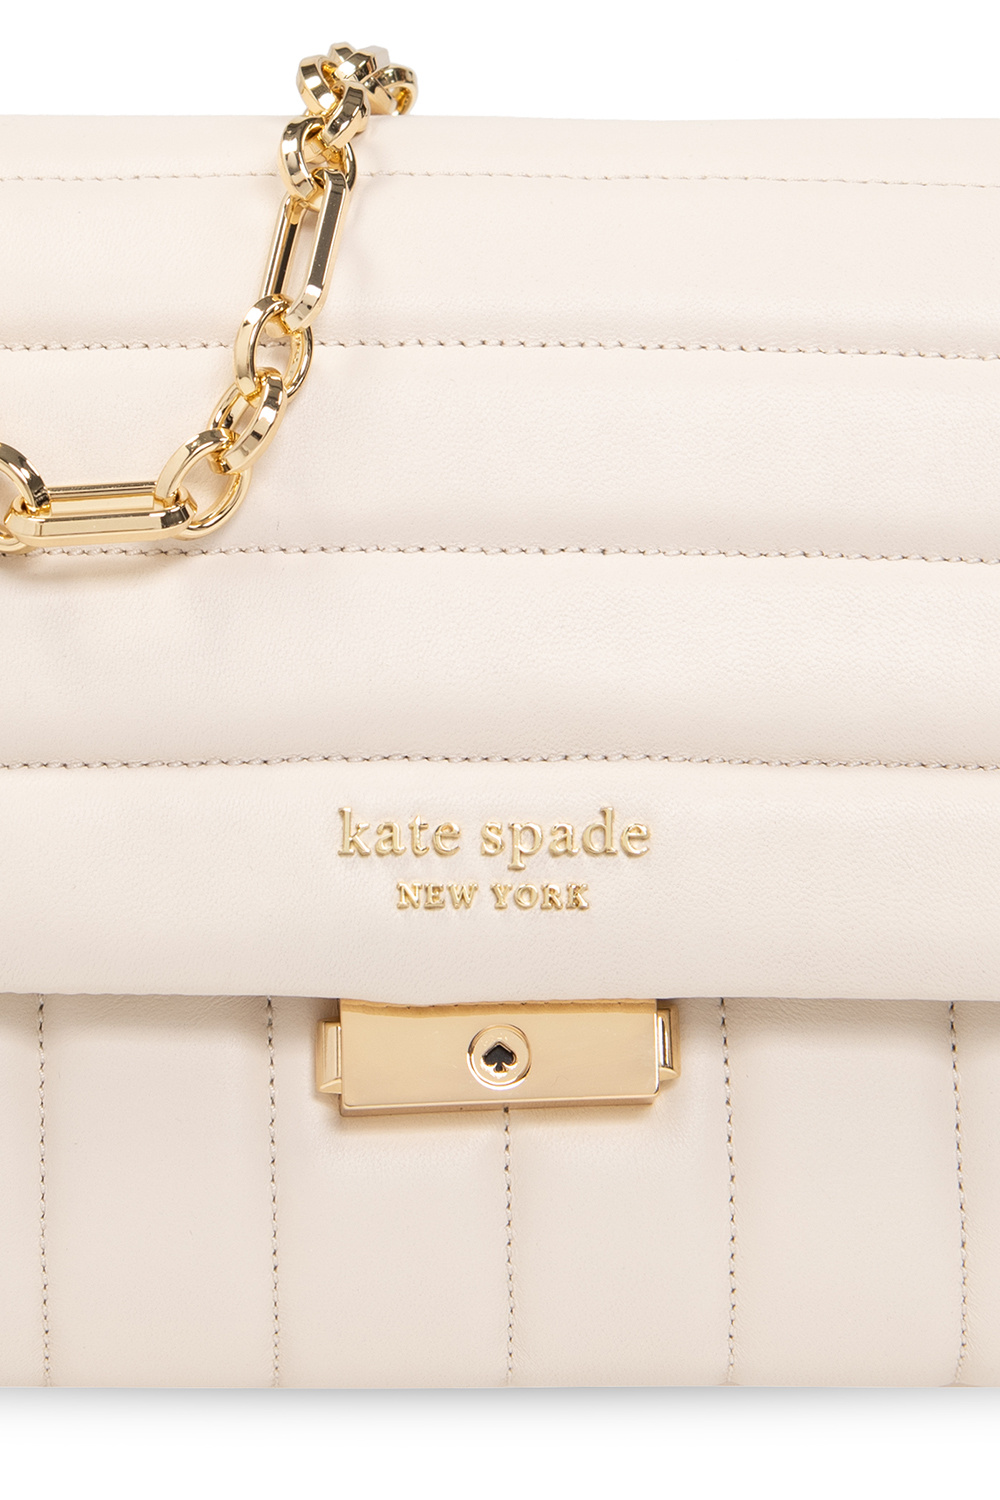 Kate Spade - Beige & Black Pebbled Leather Tote w/ Bow – Current Boutique